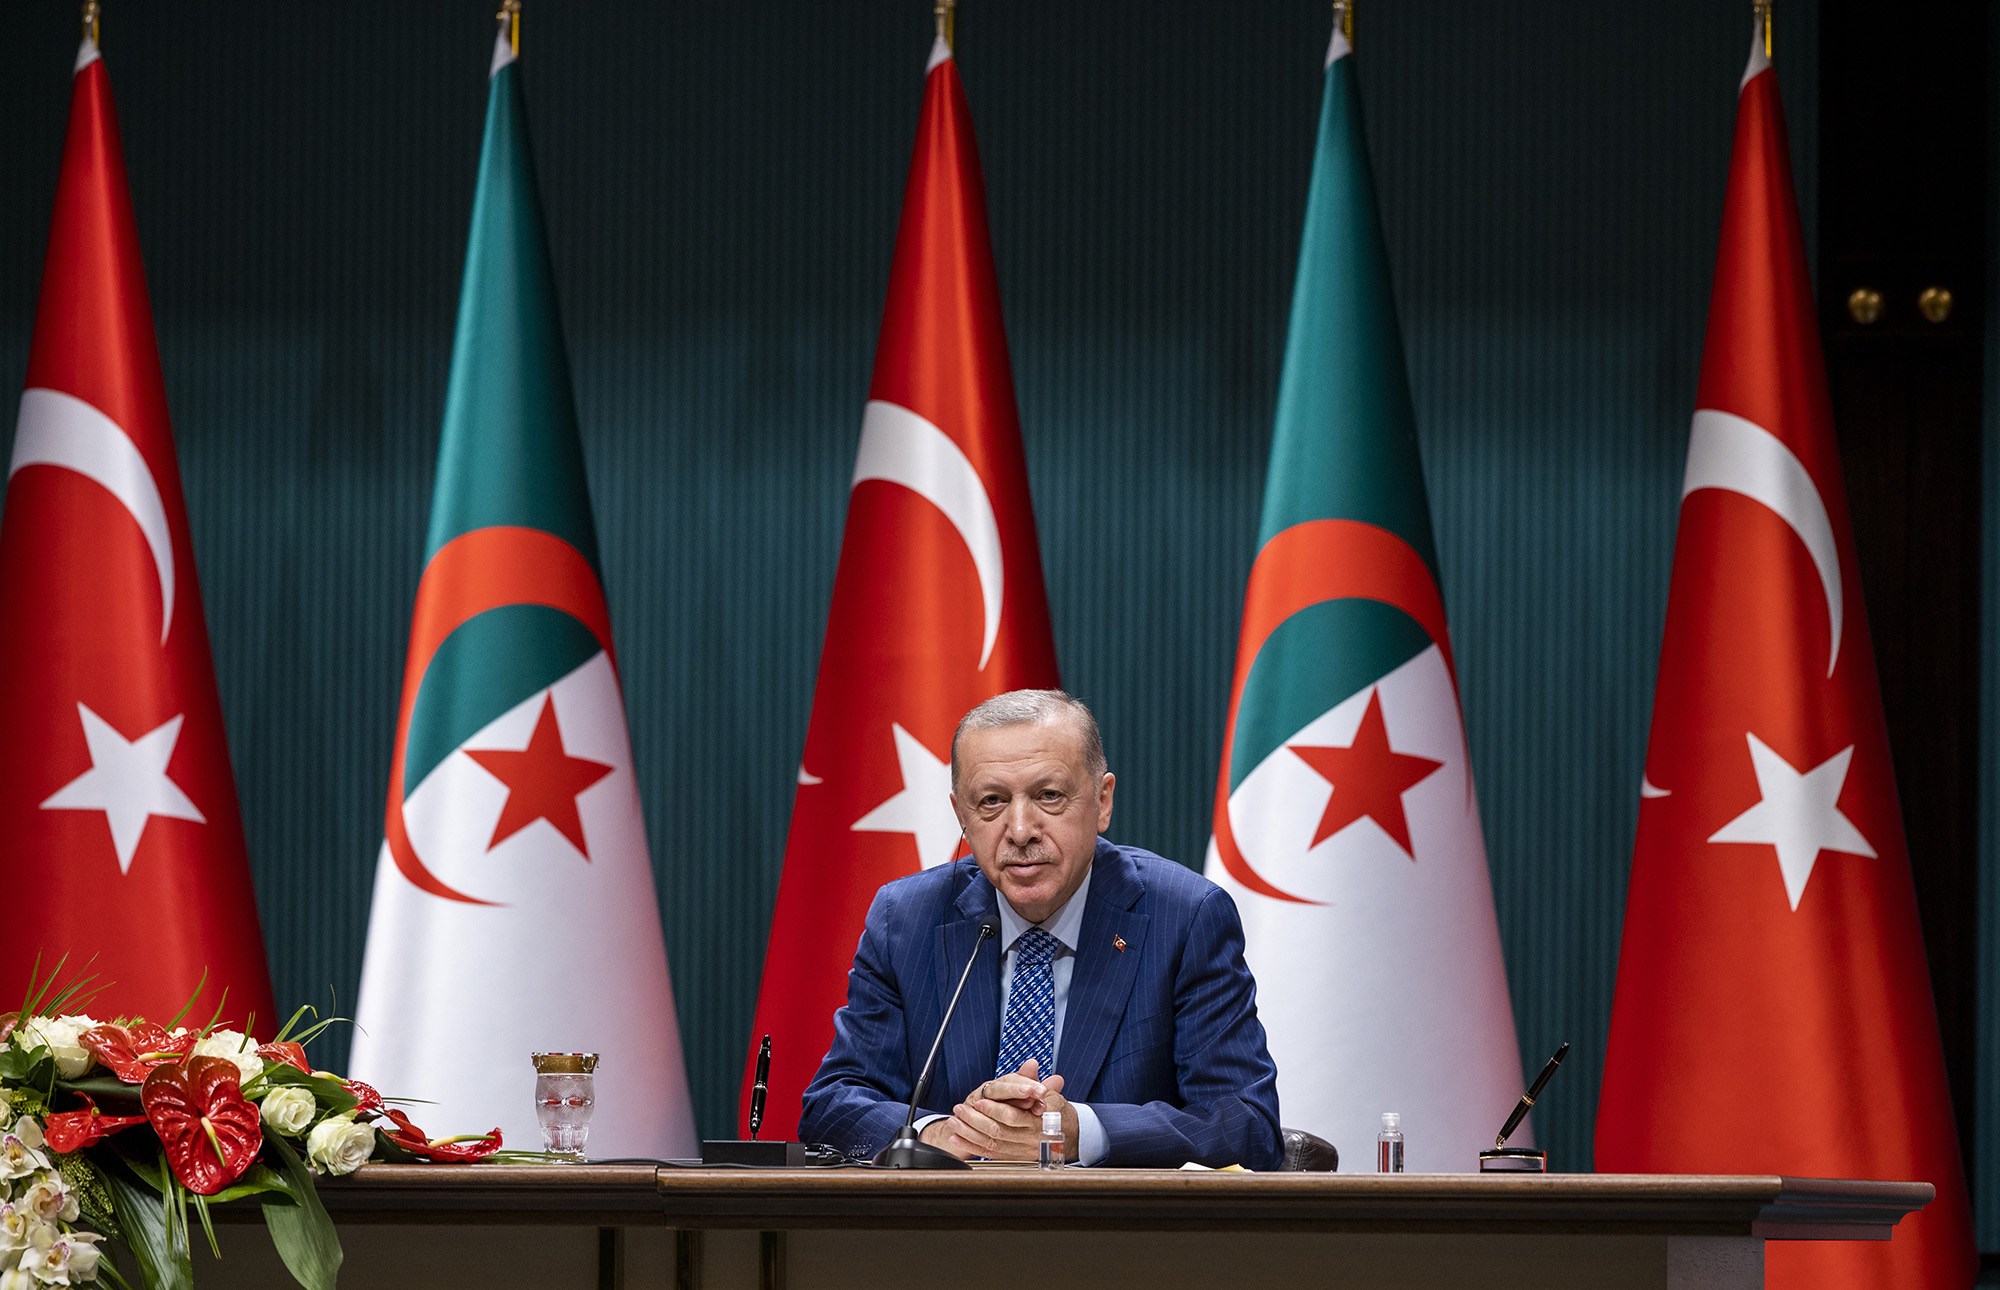 Turkish President Recep Tayyip Erdogan attends a news conference at the Presidential Complex in Ankara, Turkey, on May 16.